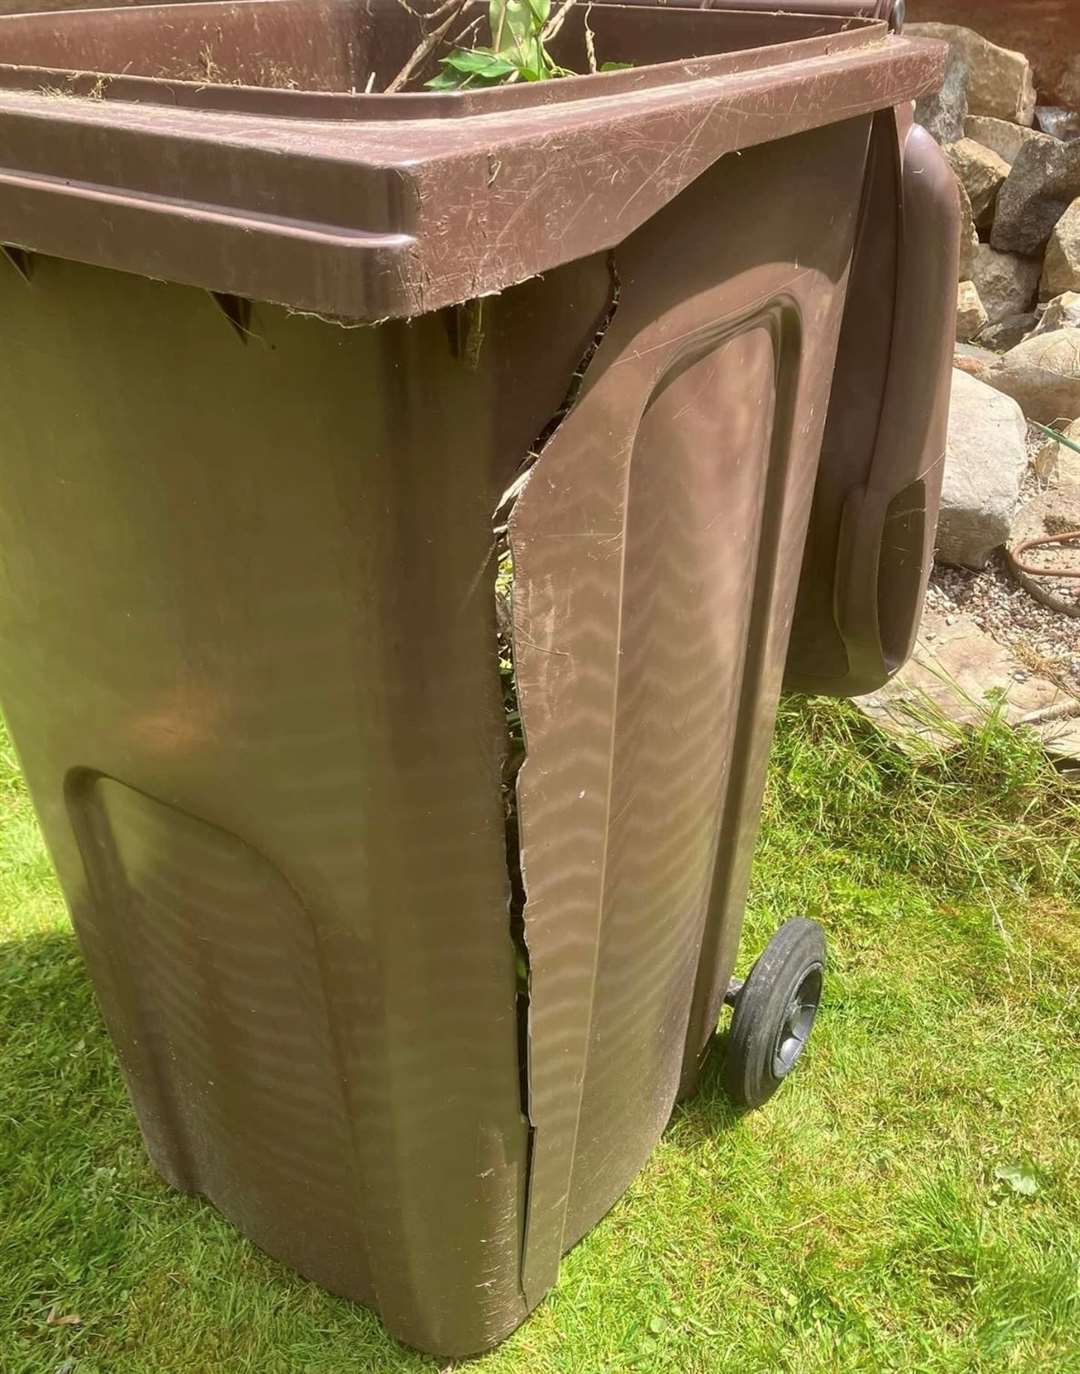 Ms Mitton says both of her brown bins have been damaged and only one has been replaced